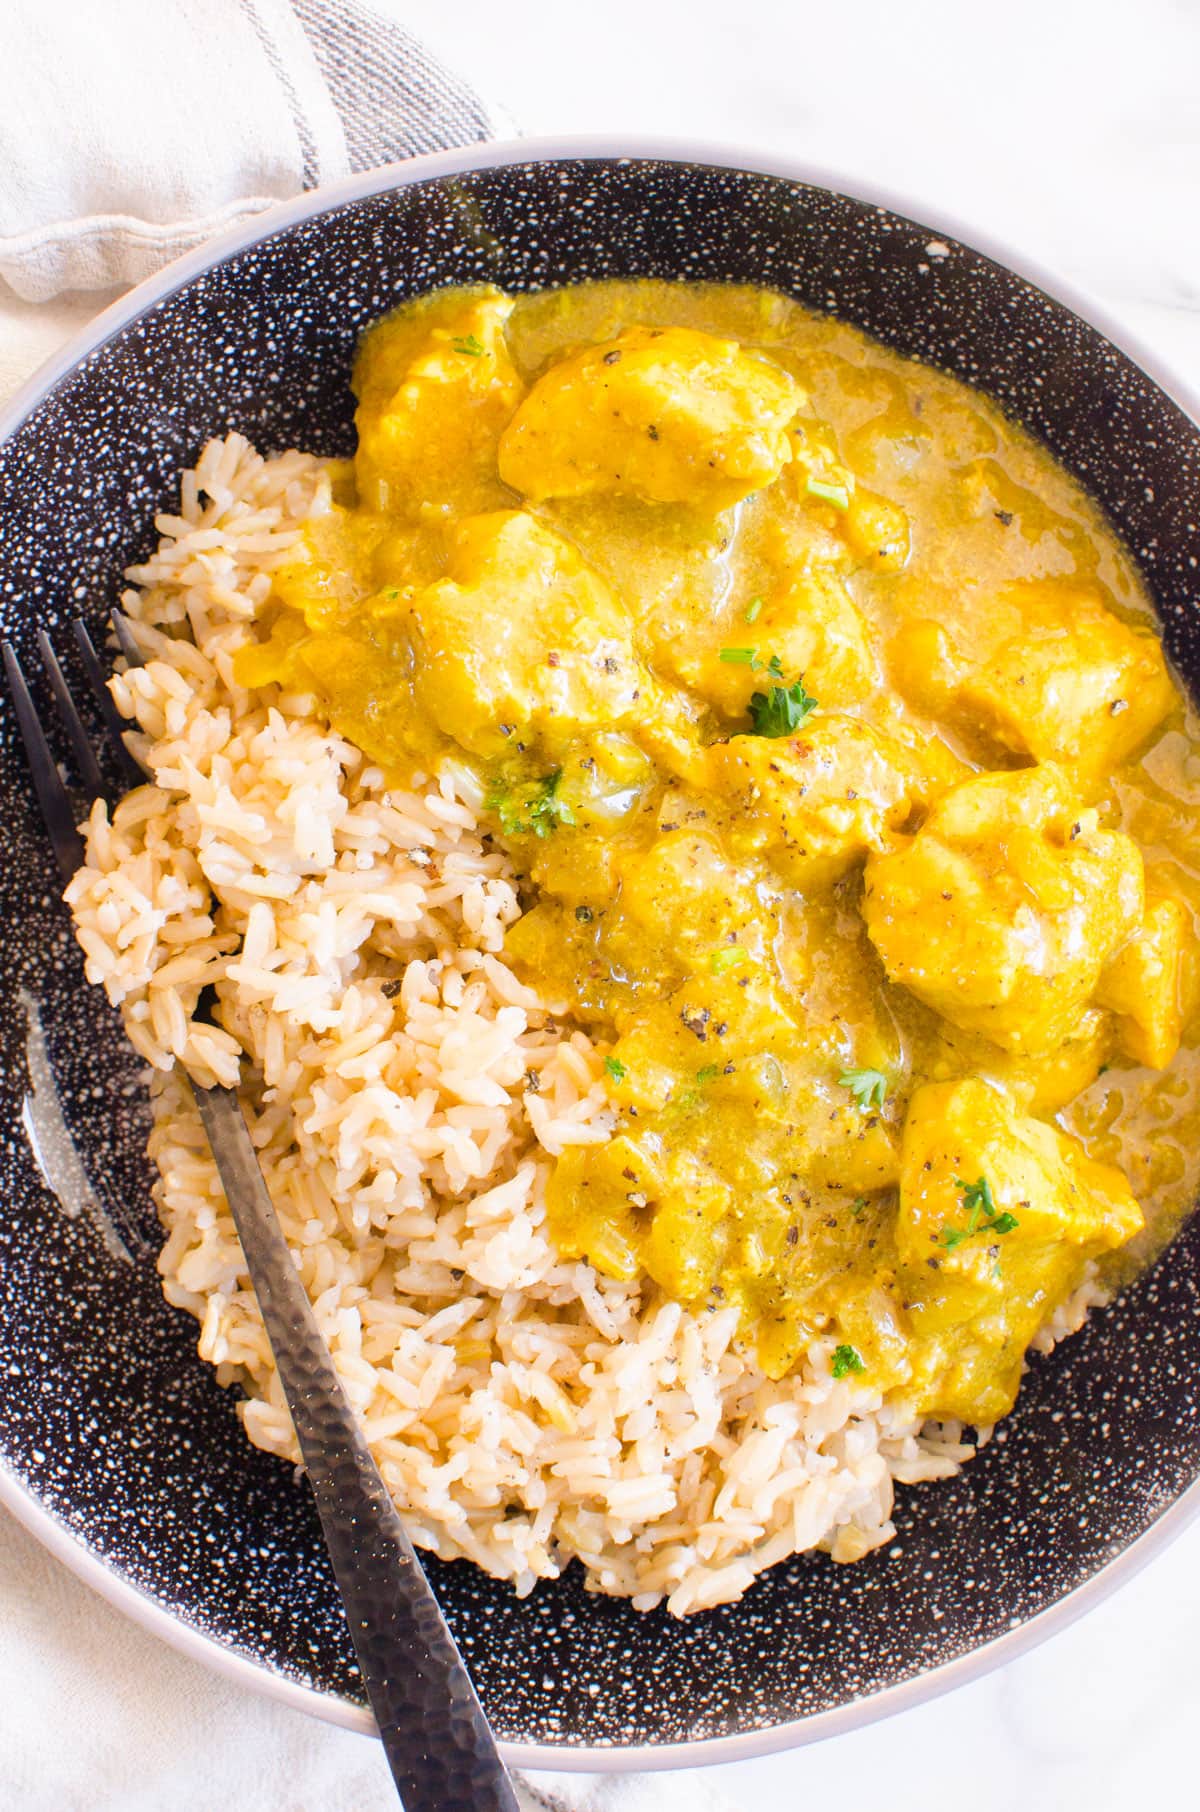 Chicken curry with brown rice in a black bowl.